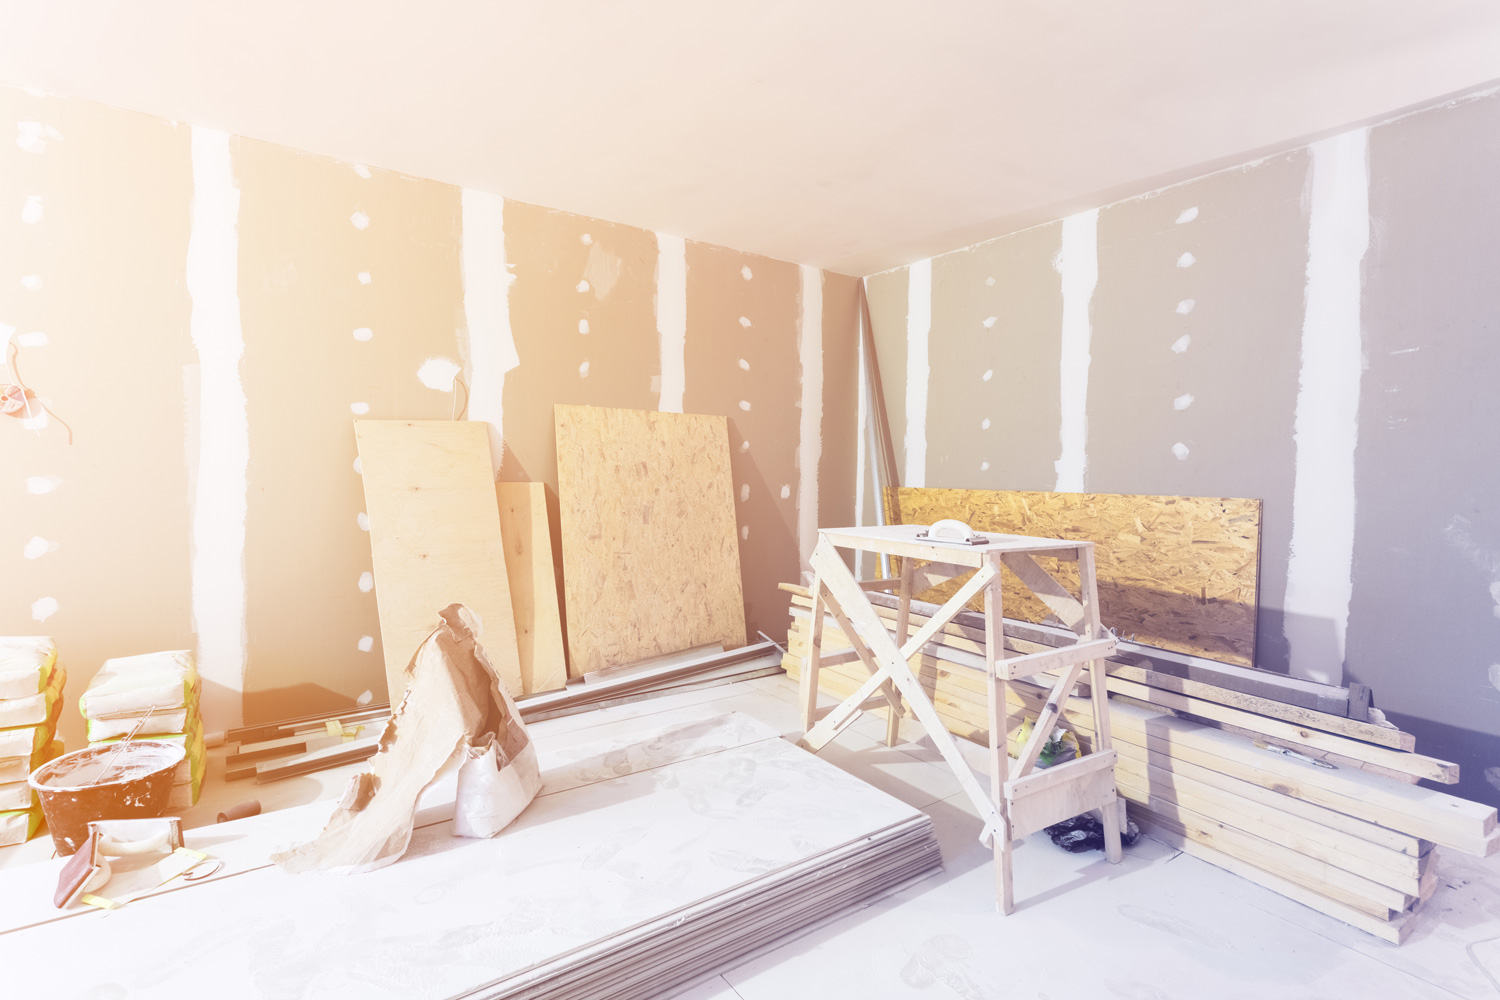 Materials for construction - putty packs, sheets of plasterboard or drywall- in apartment is under construction, remodeling, renovation, extension, restoration and reconstruction.